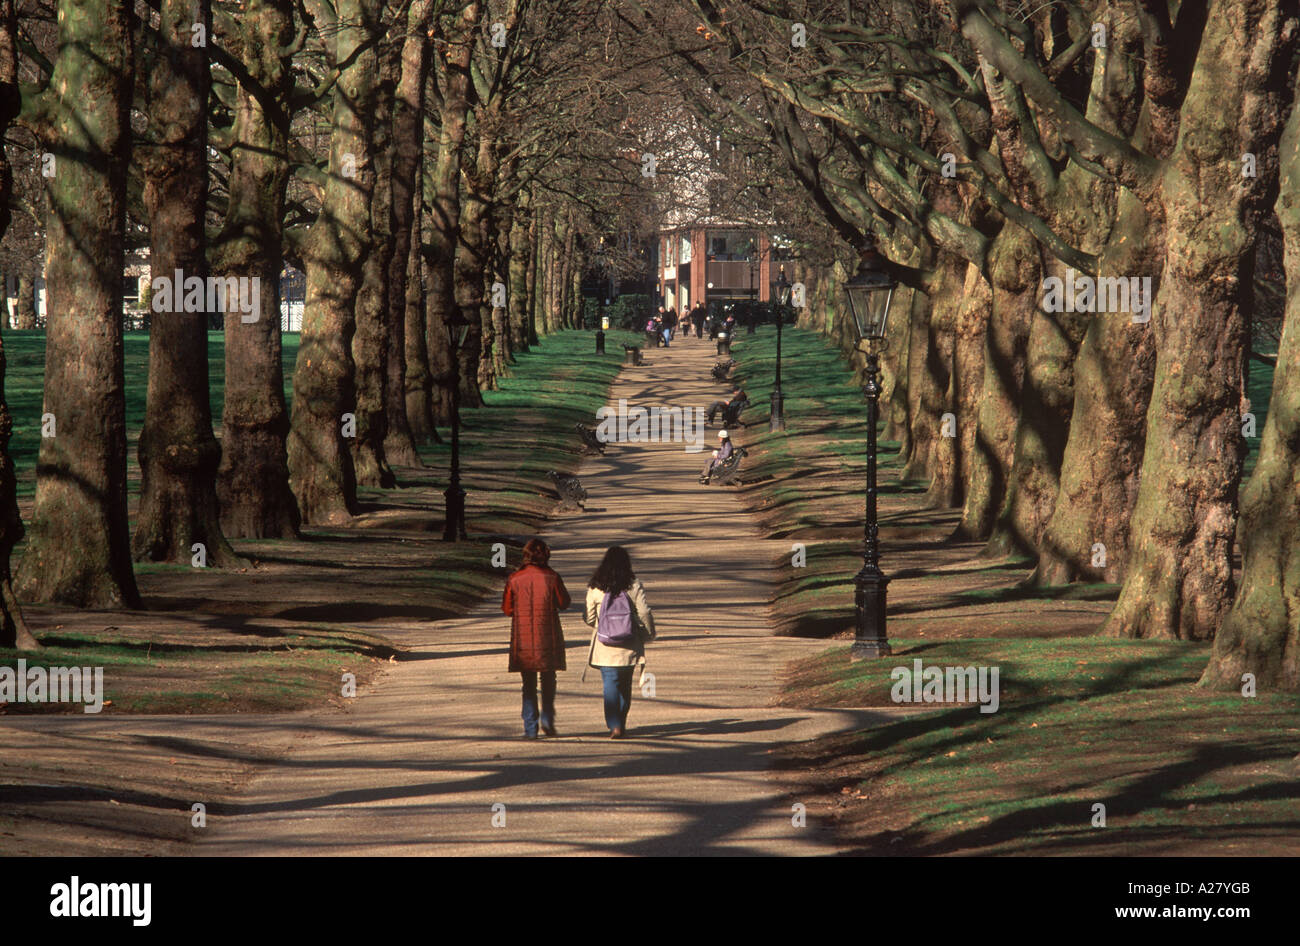 Two young women walking in Green Park on pathway lined by London Plane trees casting criss crossed shadows, London, England Stock Photo